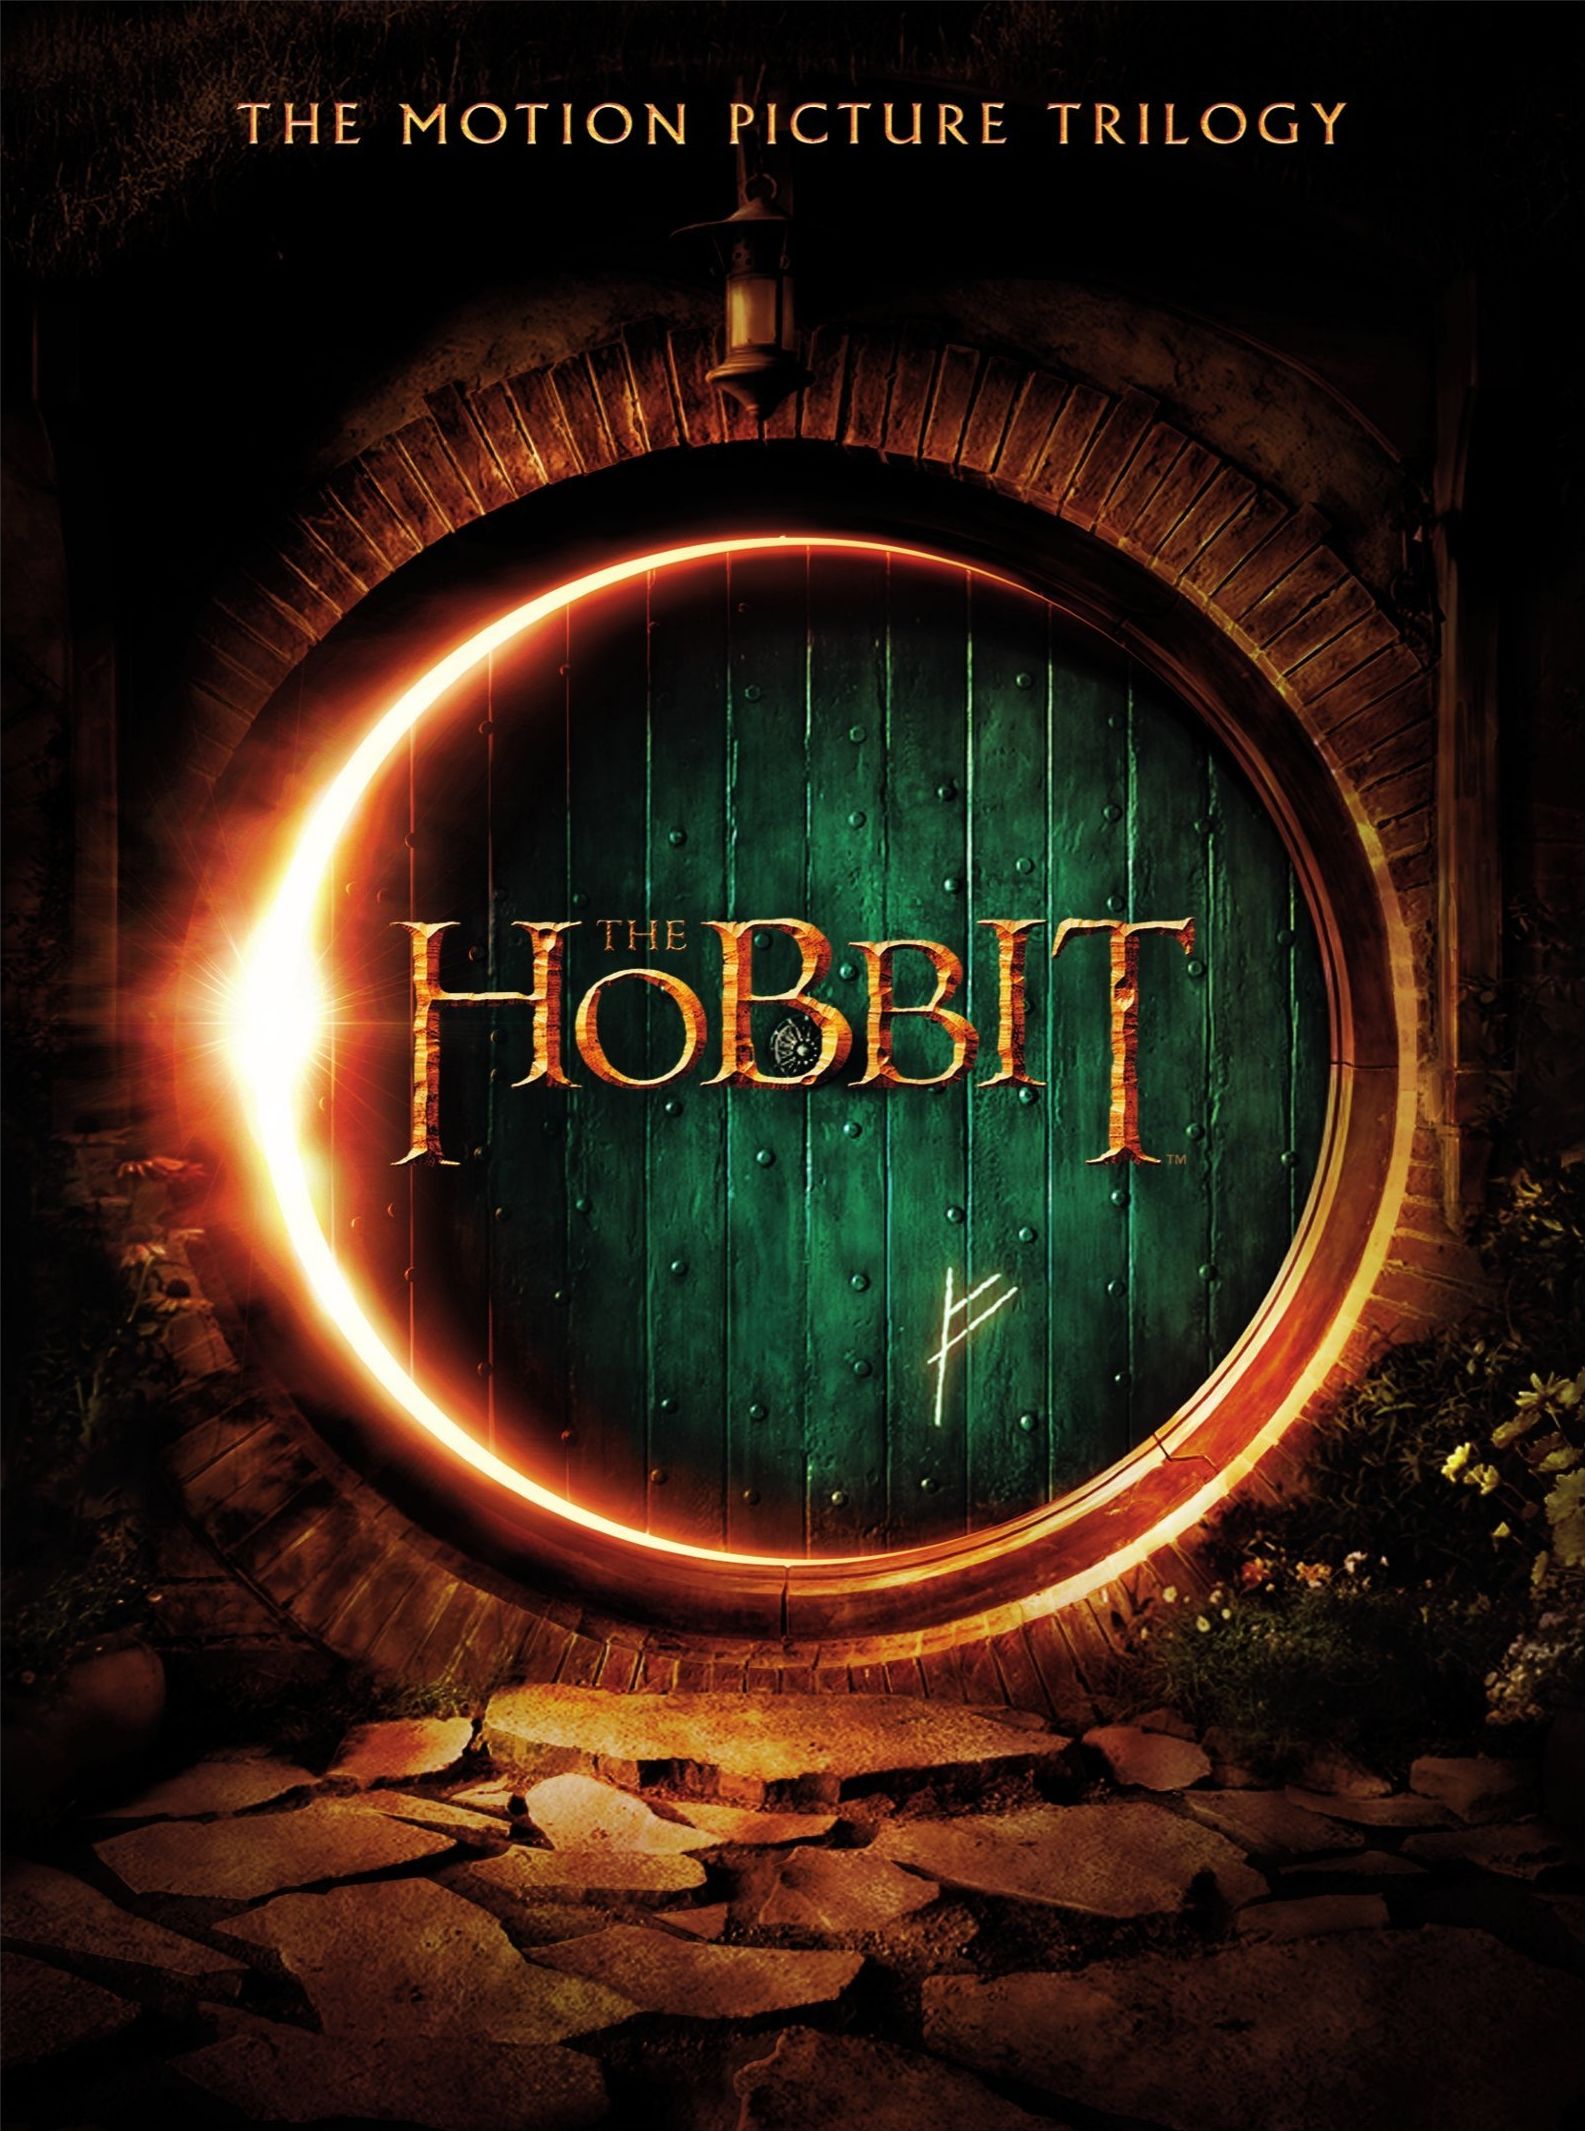 The Hobbit film trilogy | The One Wiki to Rule Them All | Fandom